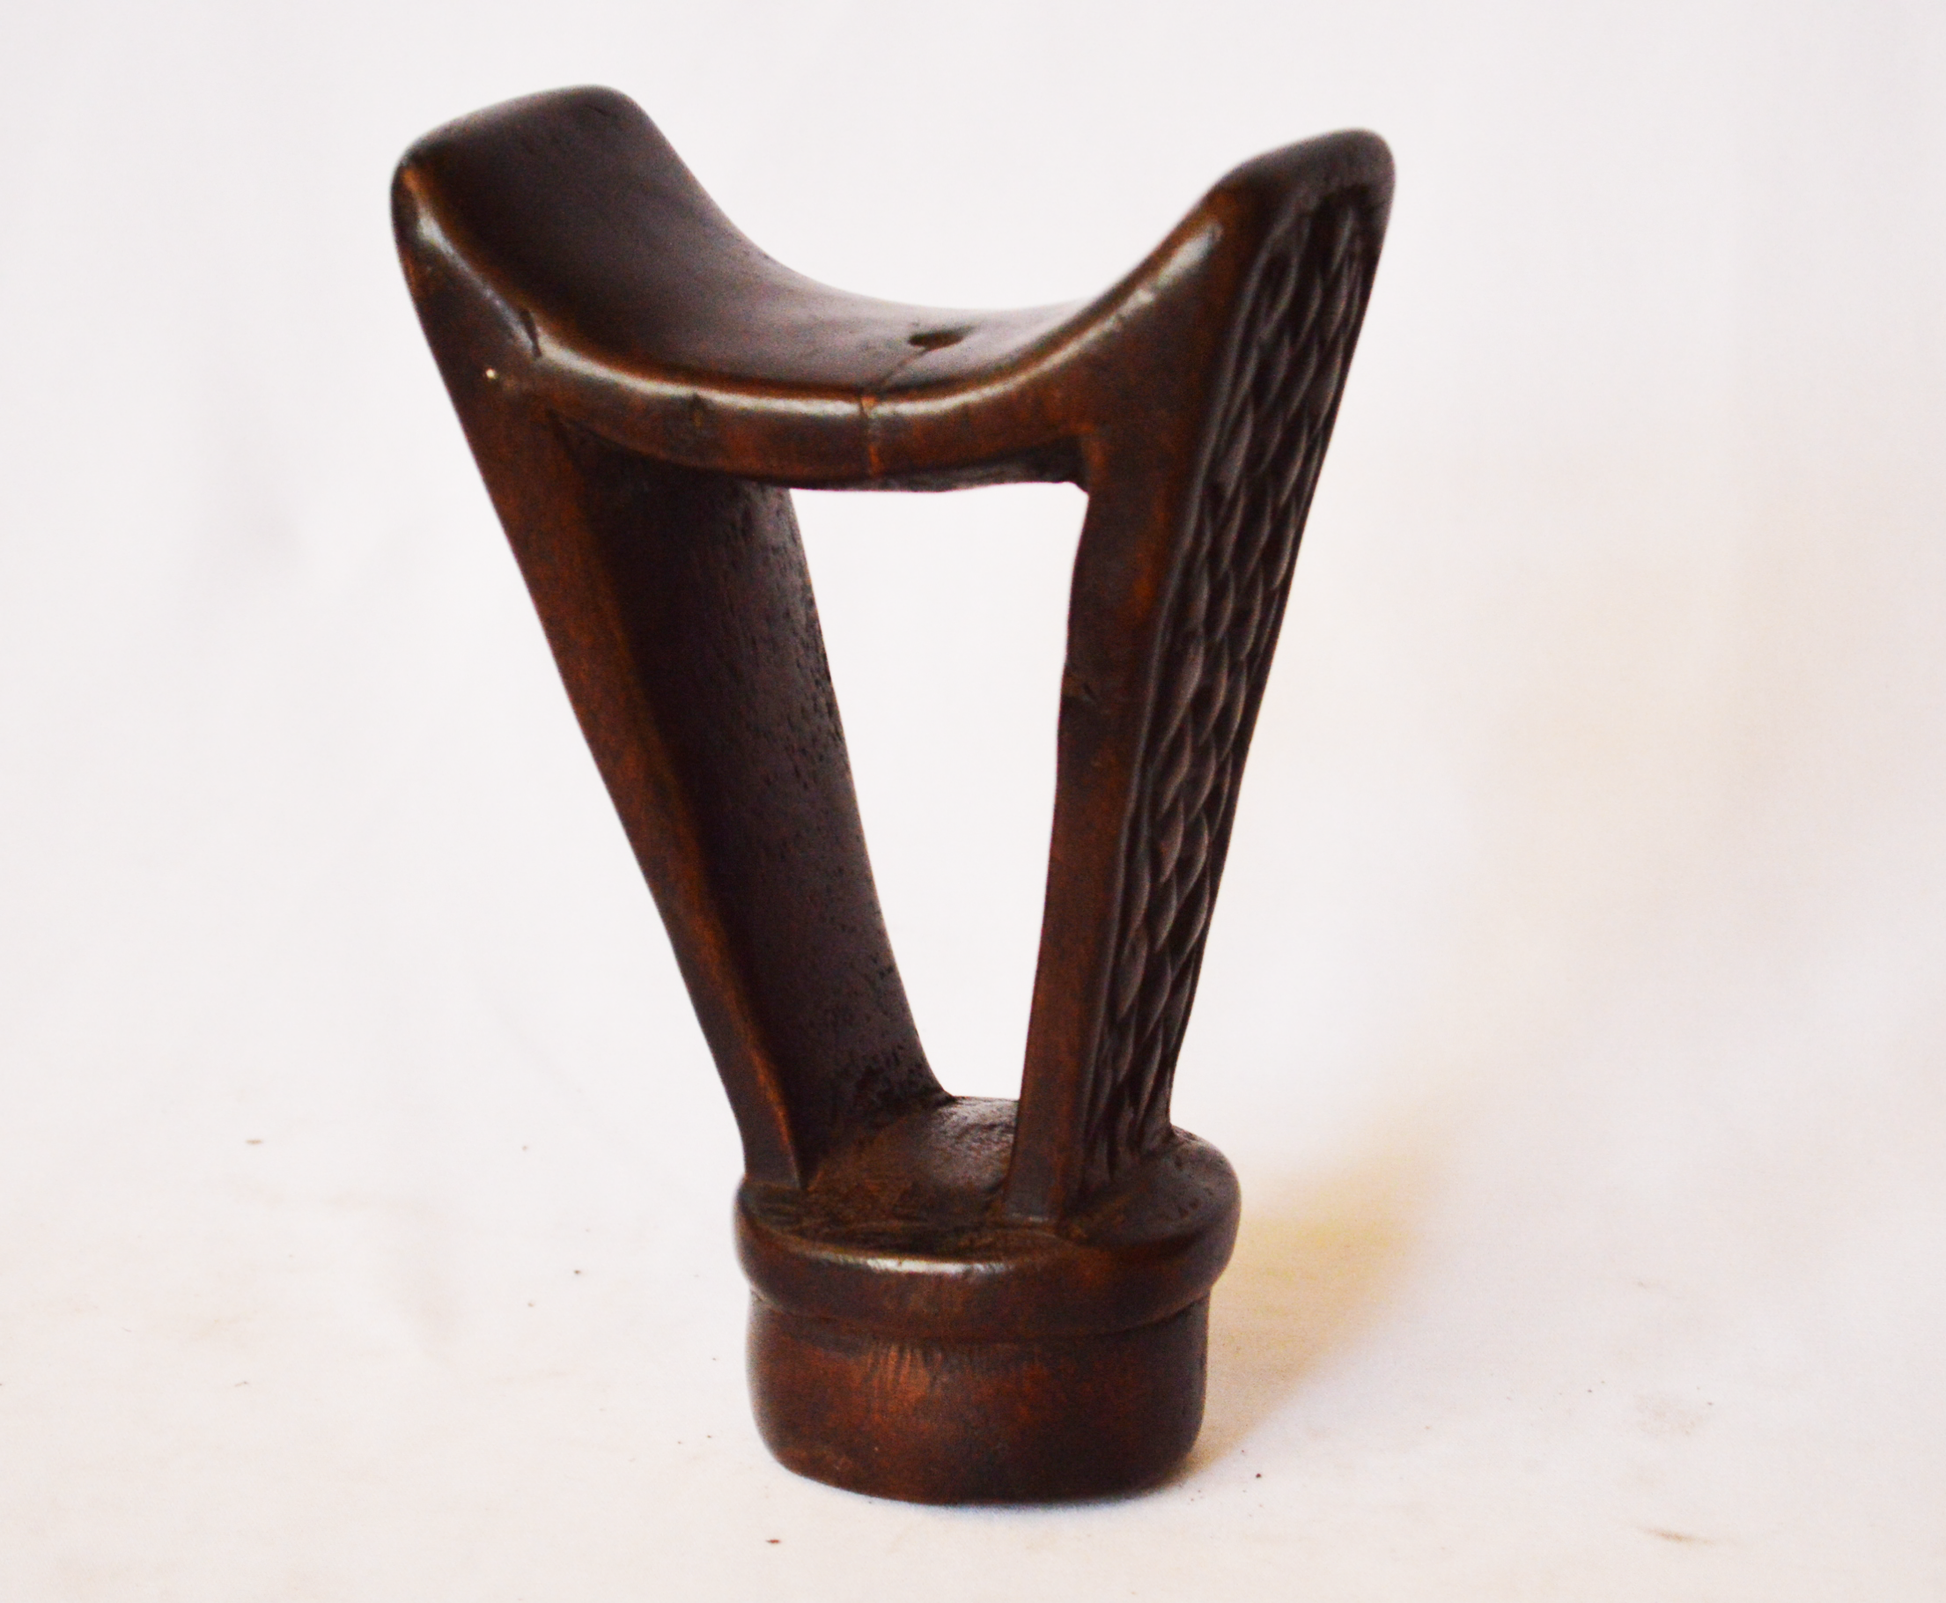 Boni Headrest - Authentic African handicrafts | Clothing, bags, painting, toys & more - CULTURE HUB by Muthoni Unchained